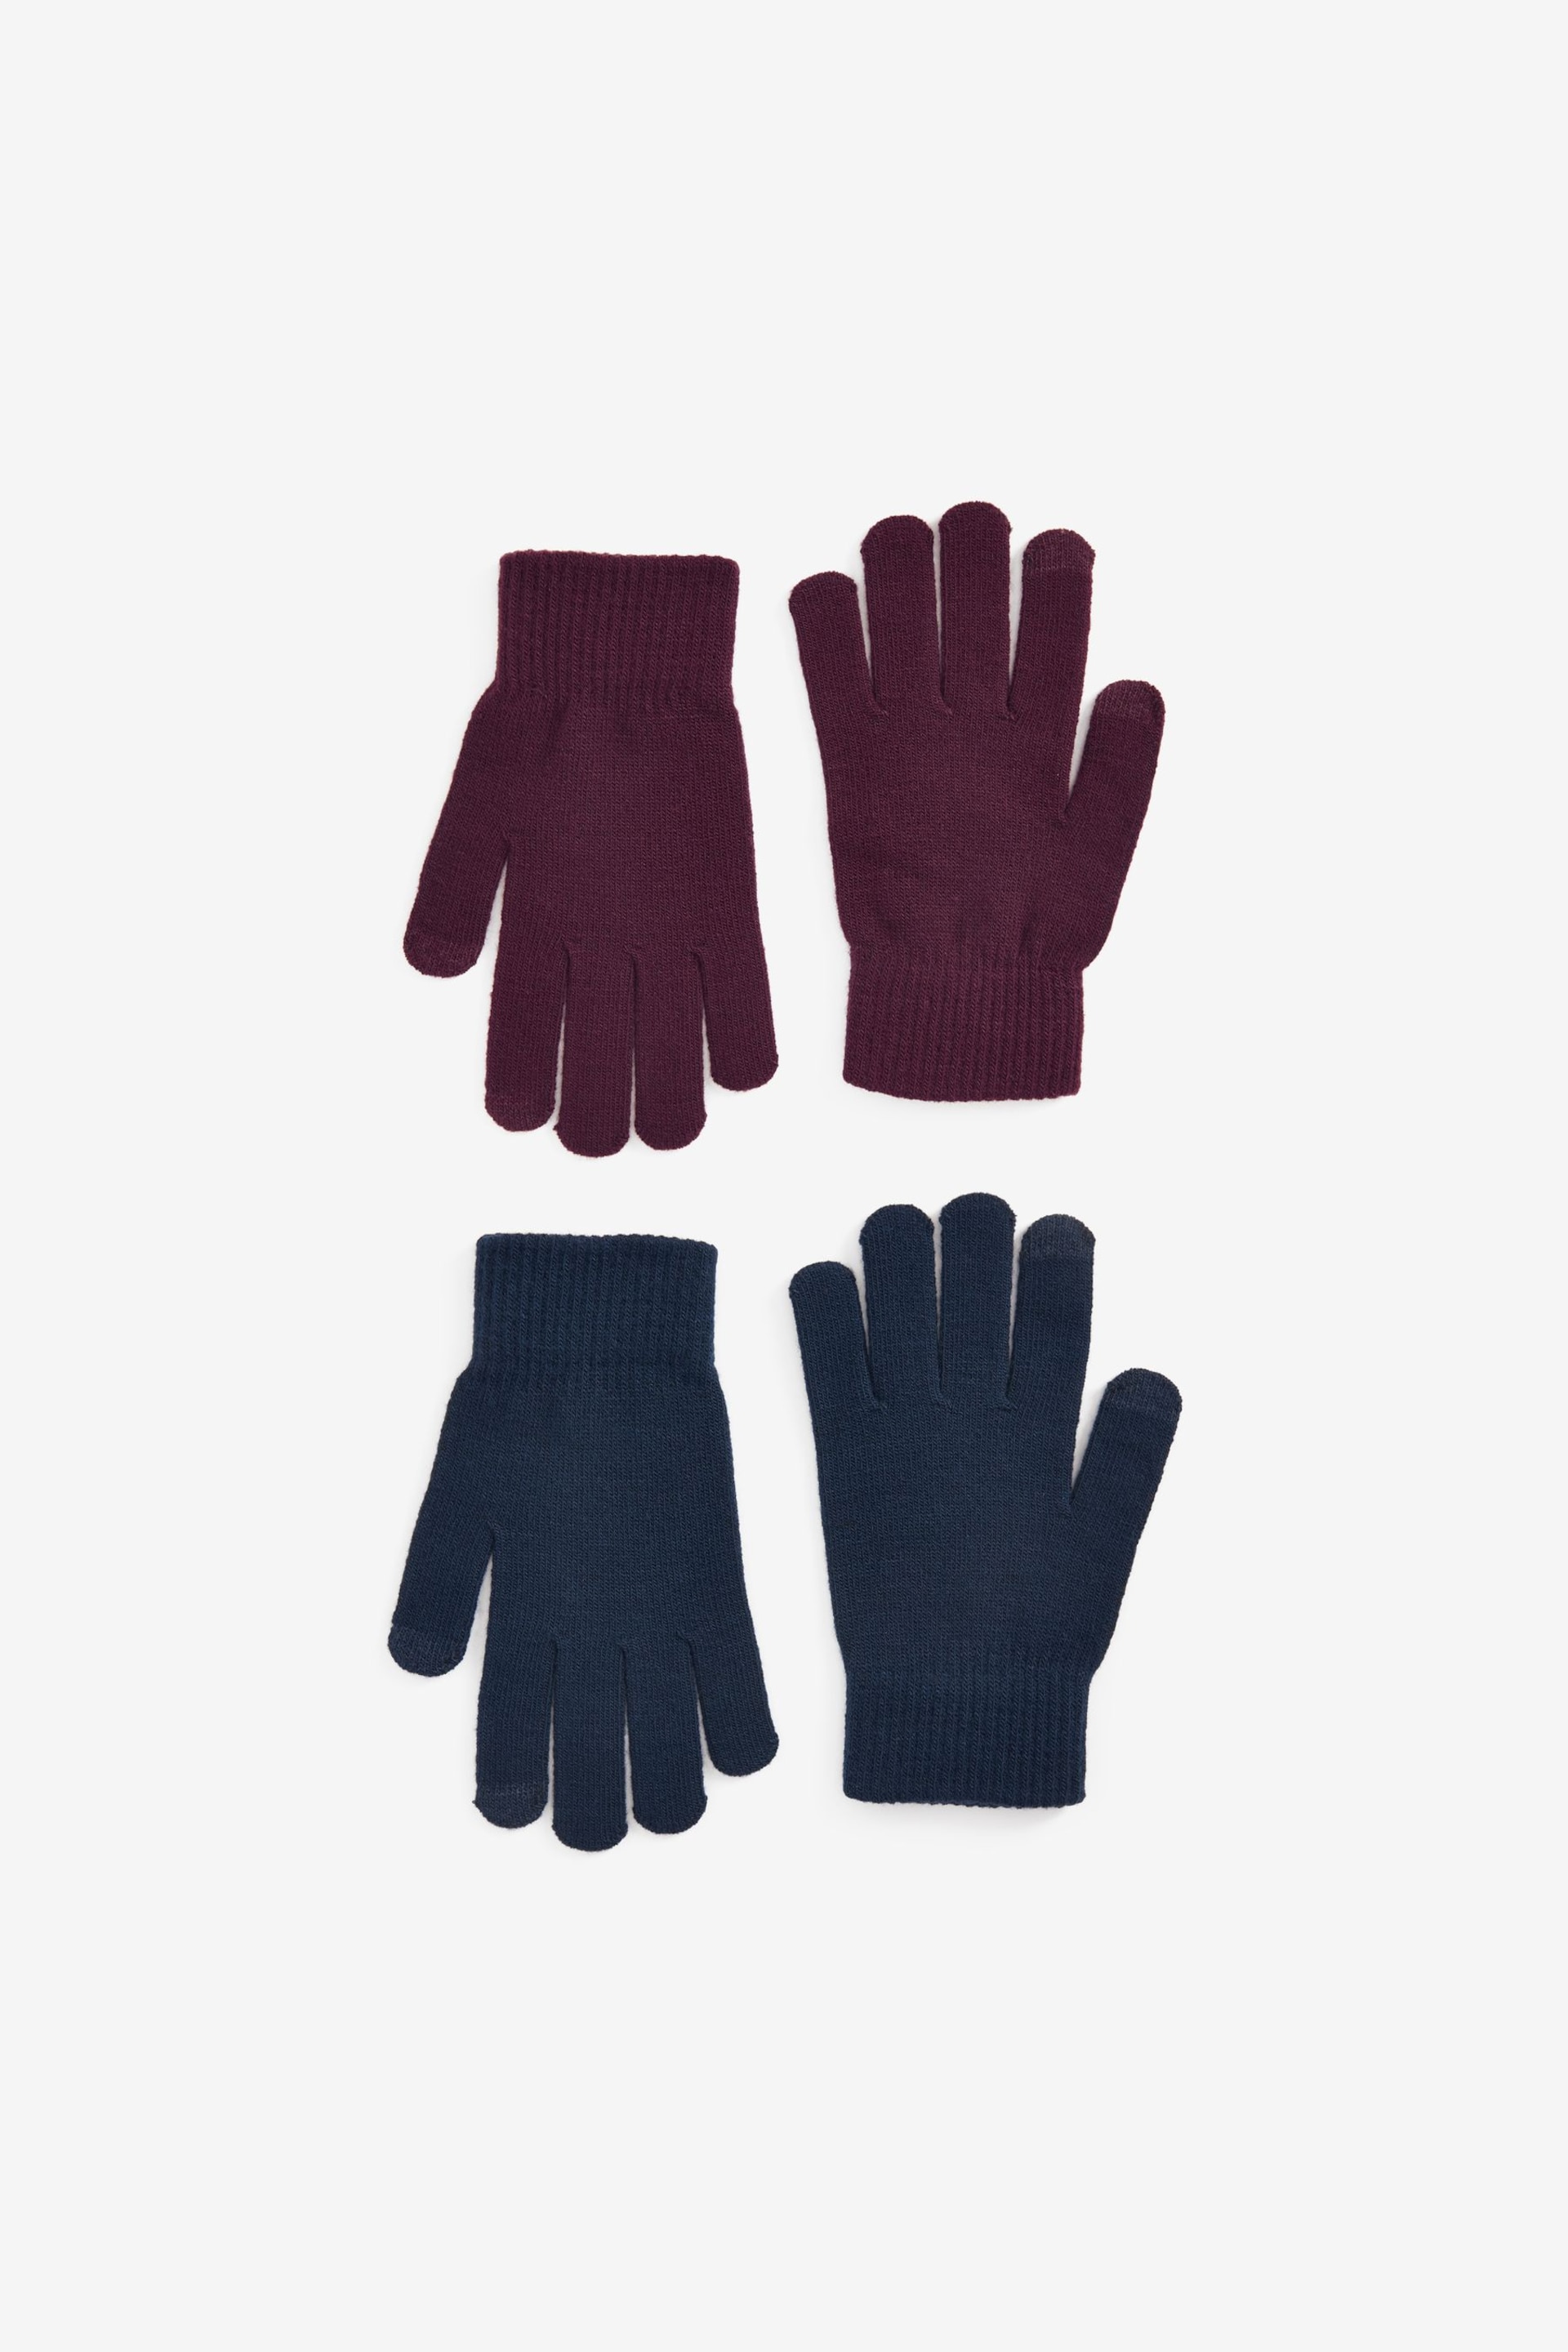 Navy/Red Magic Touchscreen Gloves 2 Pack - Image 1 of 3